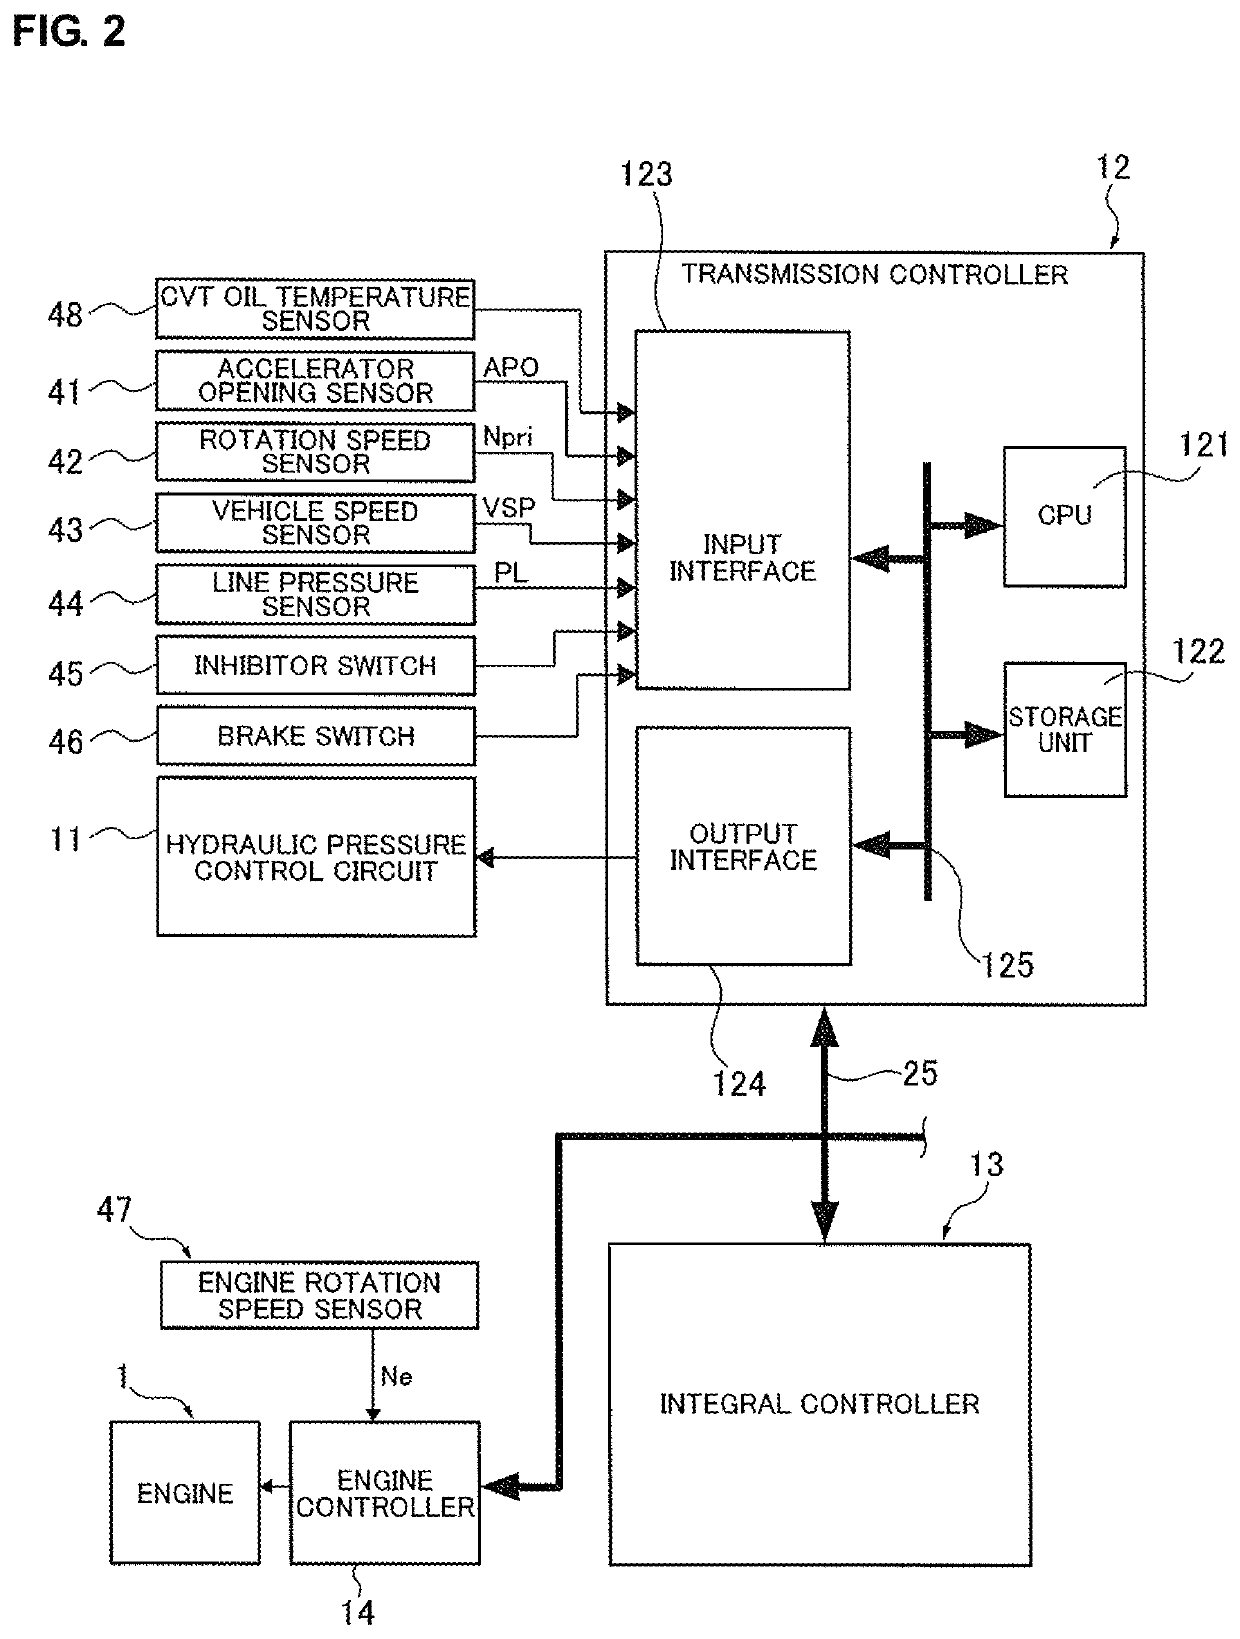 Device for controlling vehicular variator